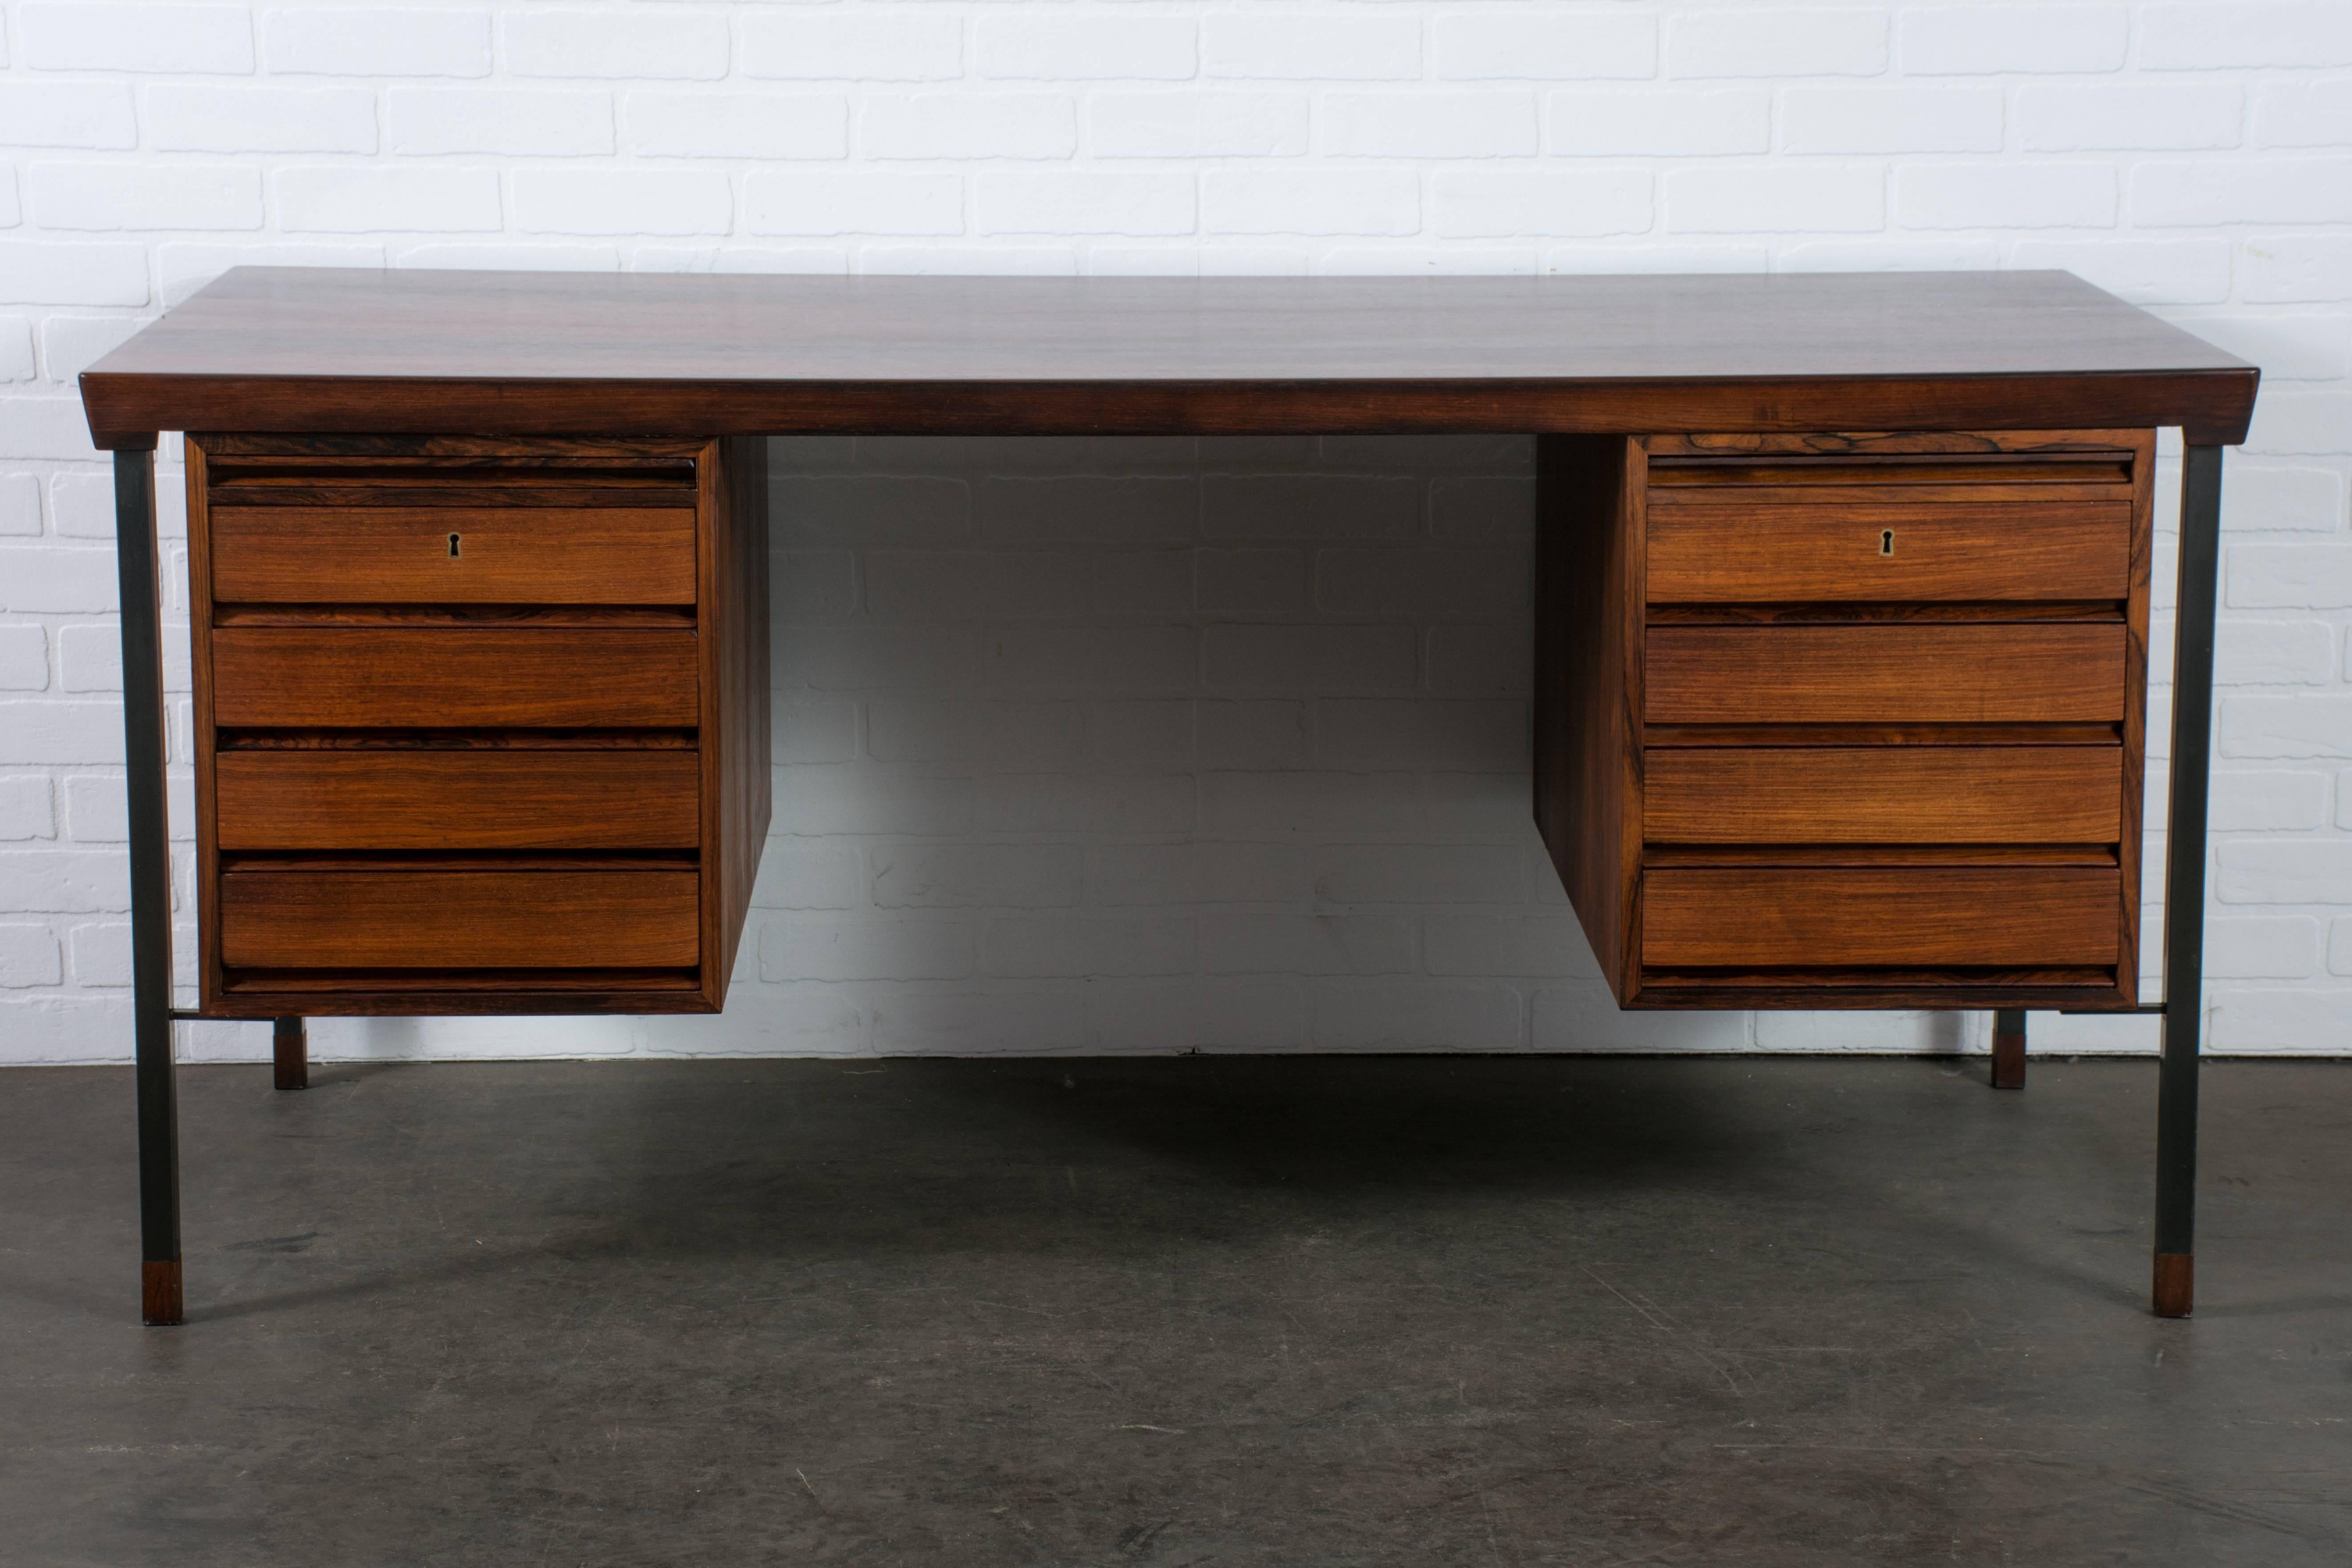 This Danish Modern rosewood desk was designed by Peter Hvidt and Orla Molgaard-Nielsen for Soborg Mobelfabrik in the 1960's, Denmark. It features eight drawers (the top two with small removable trays for pens, etc.) and two trays with glass tops